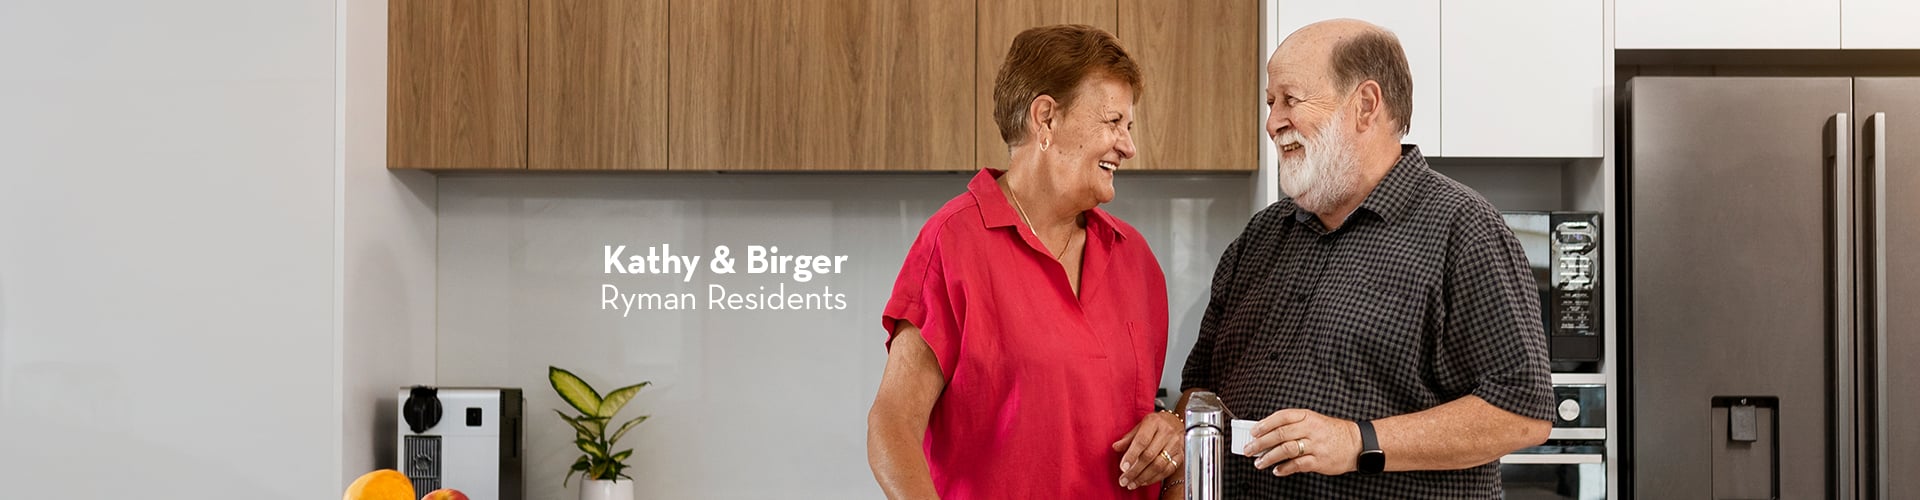 6539 RYMAN NZ Trusted Brands Campaign Landing Page 1920x500_KATHY & BIRGER (1)